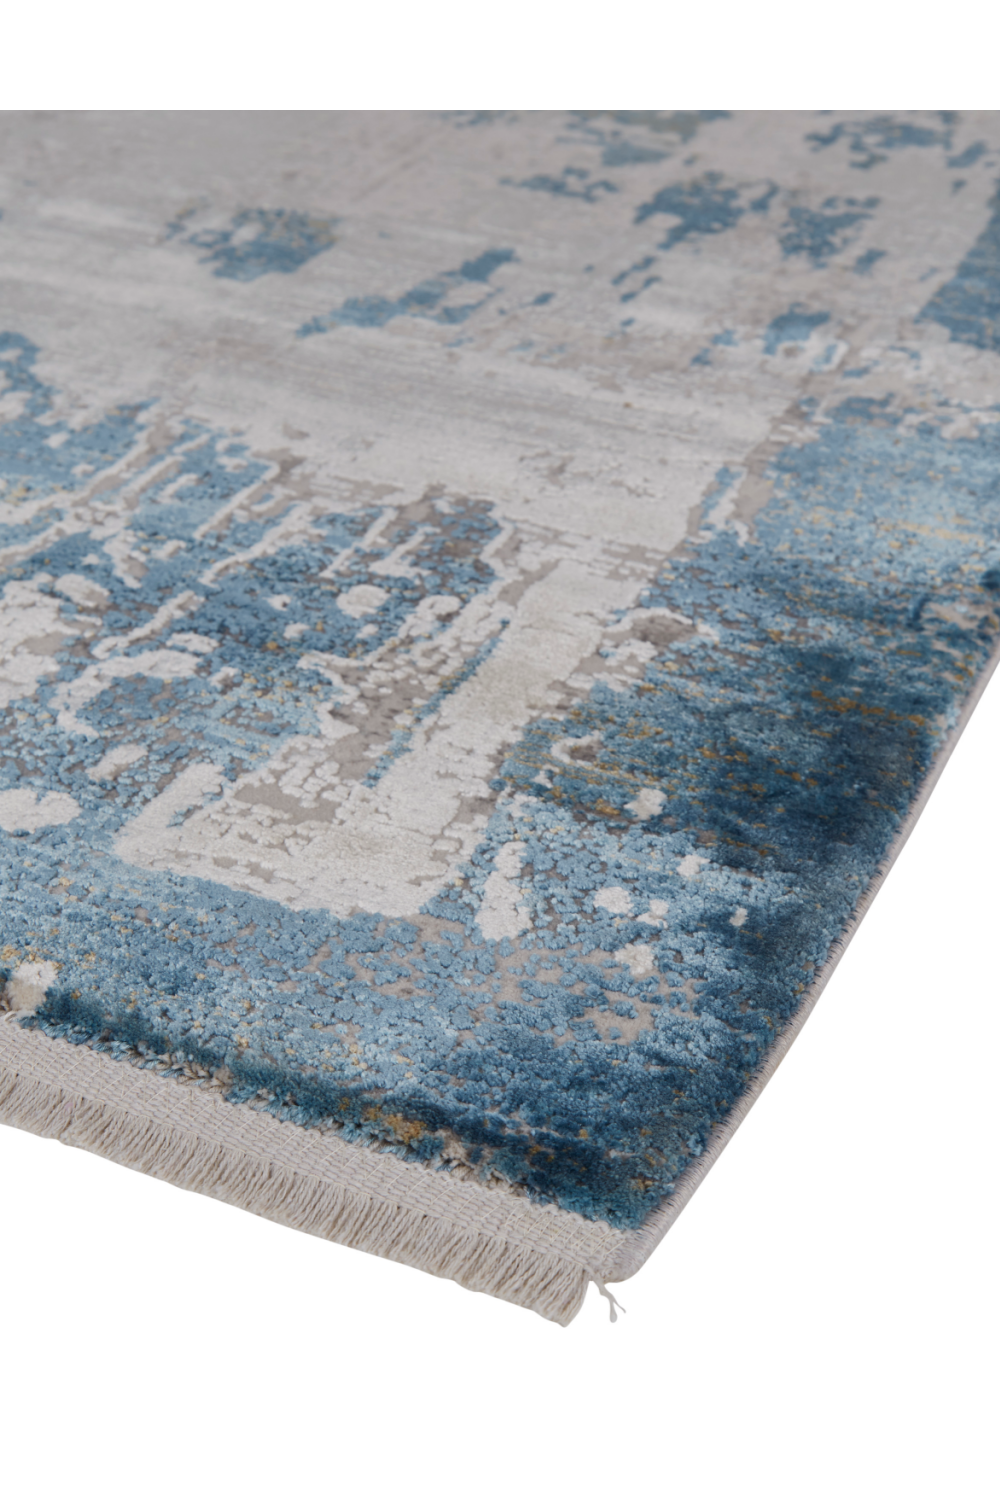 Blue and Beige Patterned Rug 6'5" x 9'5" | Andrew Martin Azra | Oroa.com